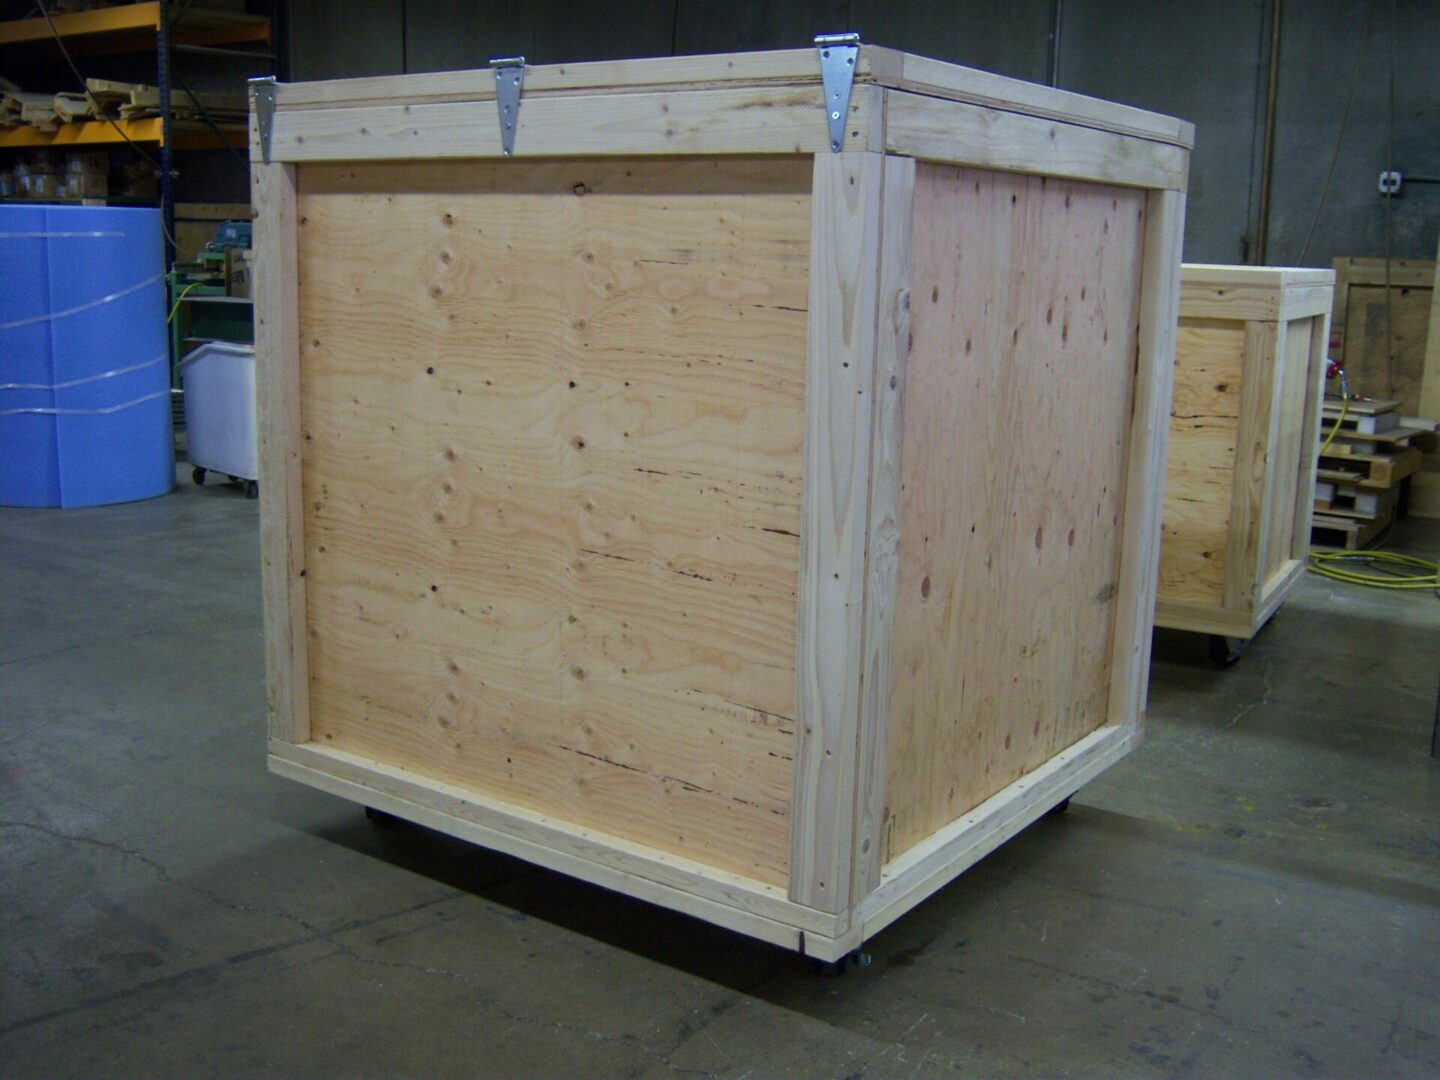 A wooden crate with metal wheels on the side.